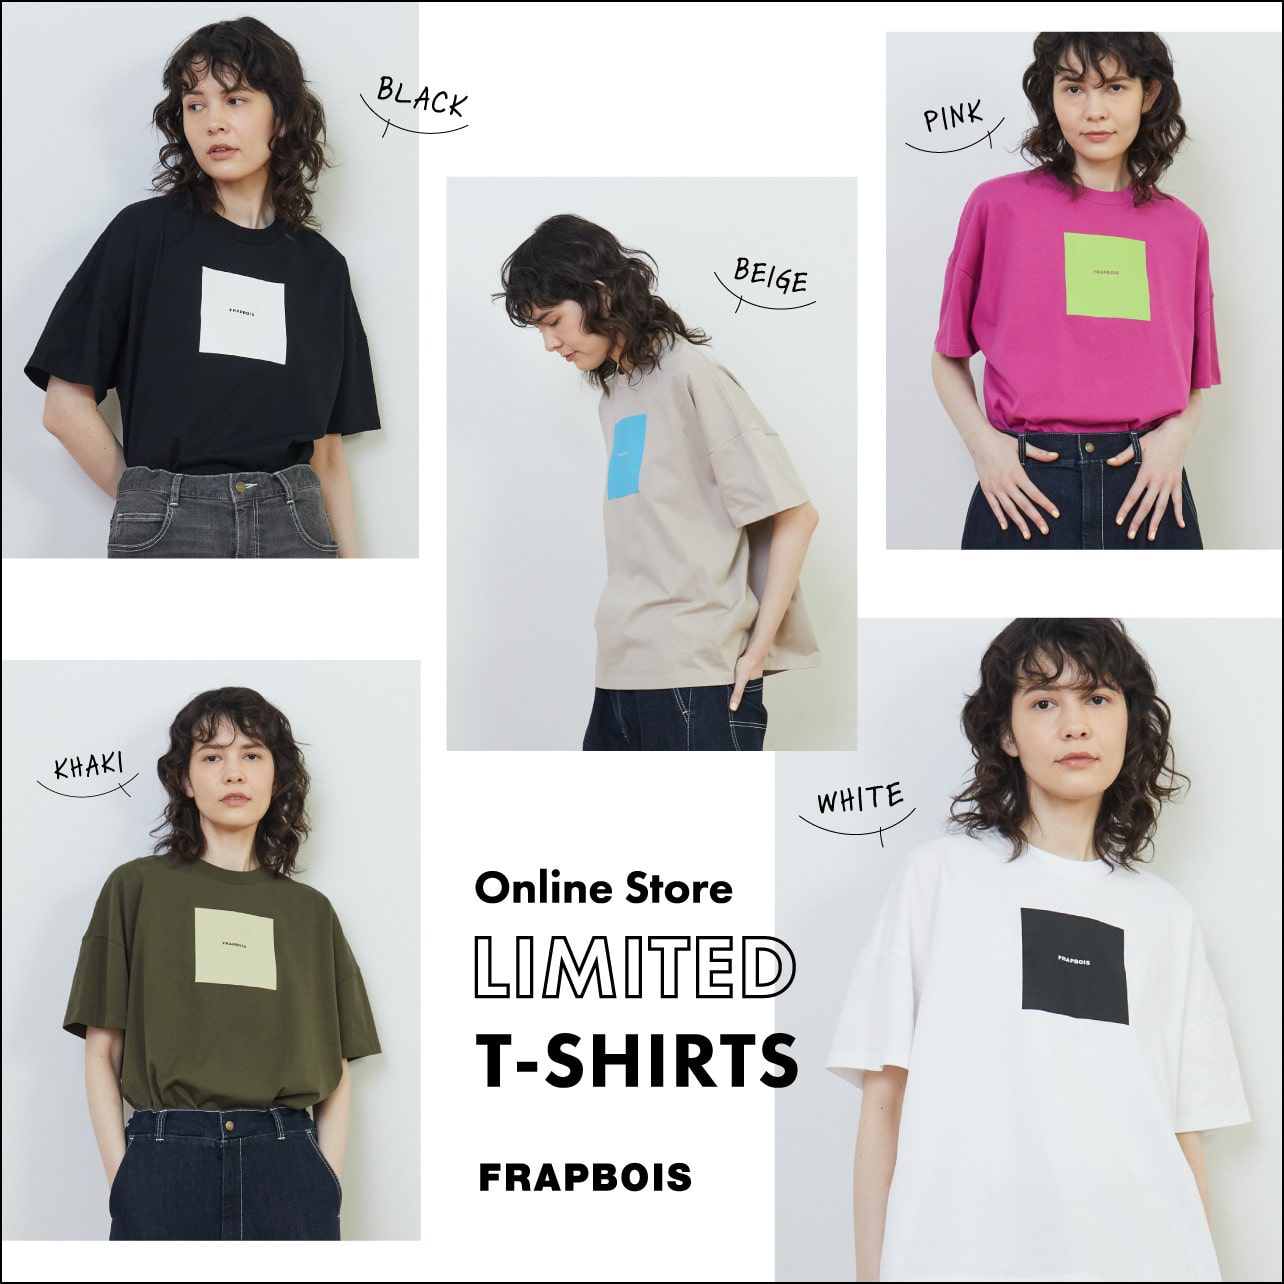 Online Store Limited T-Shirts